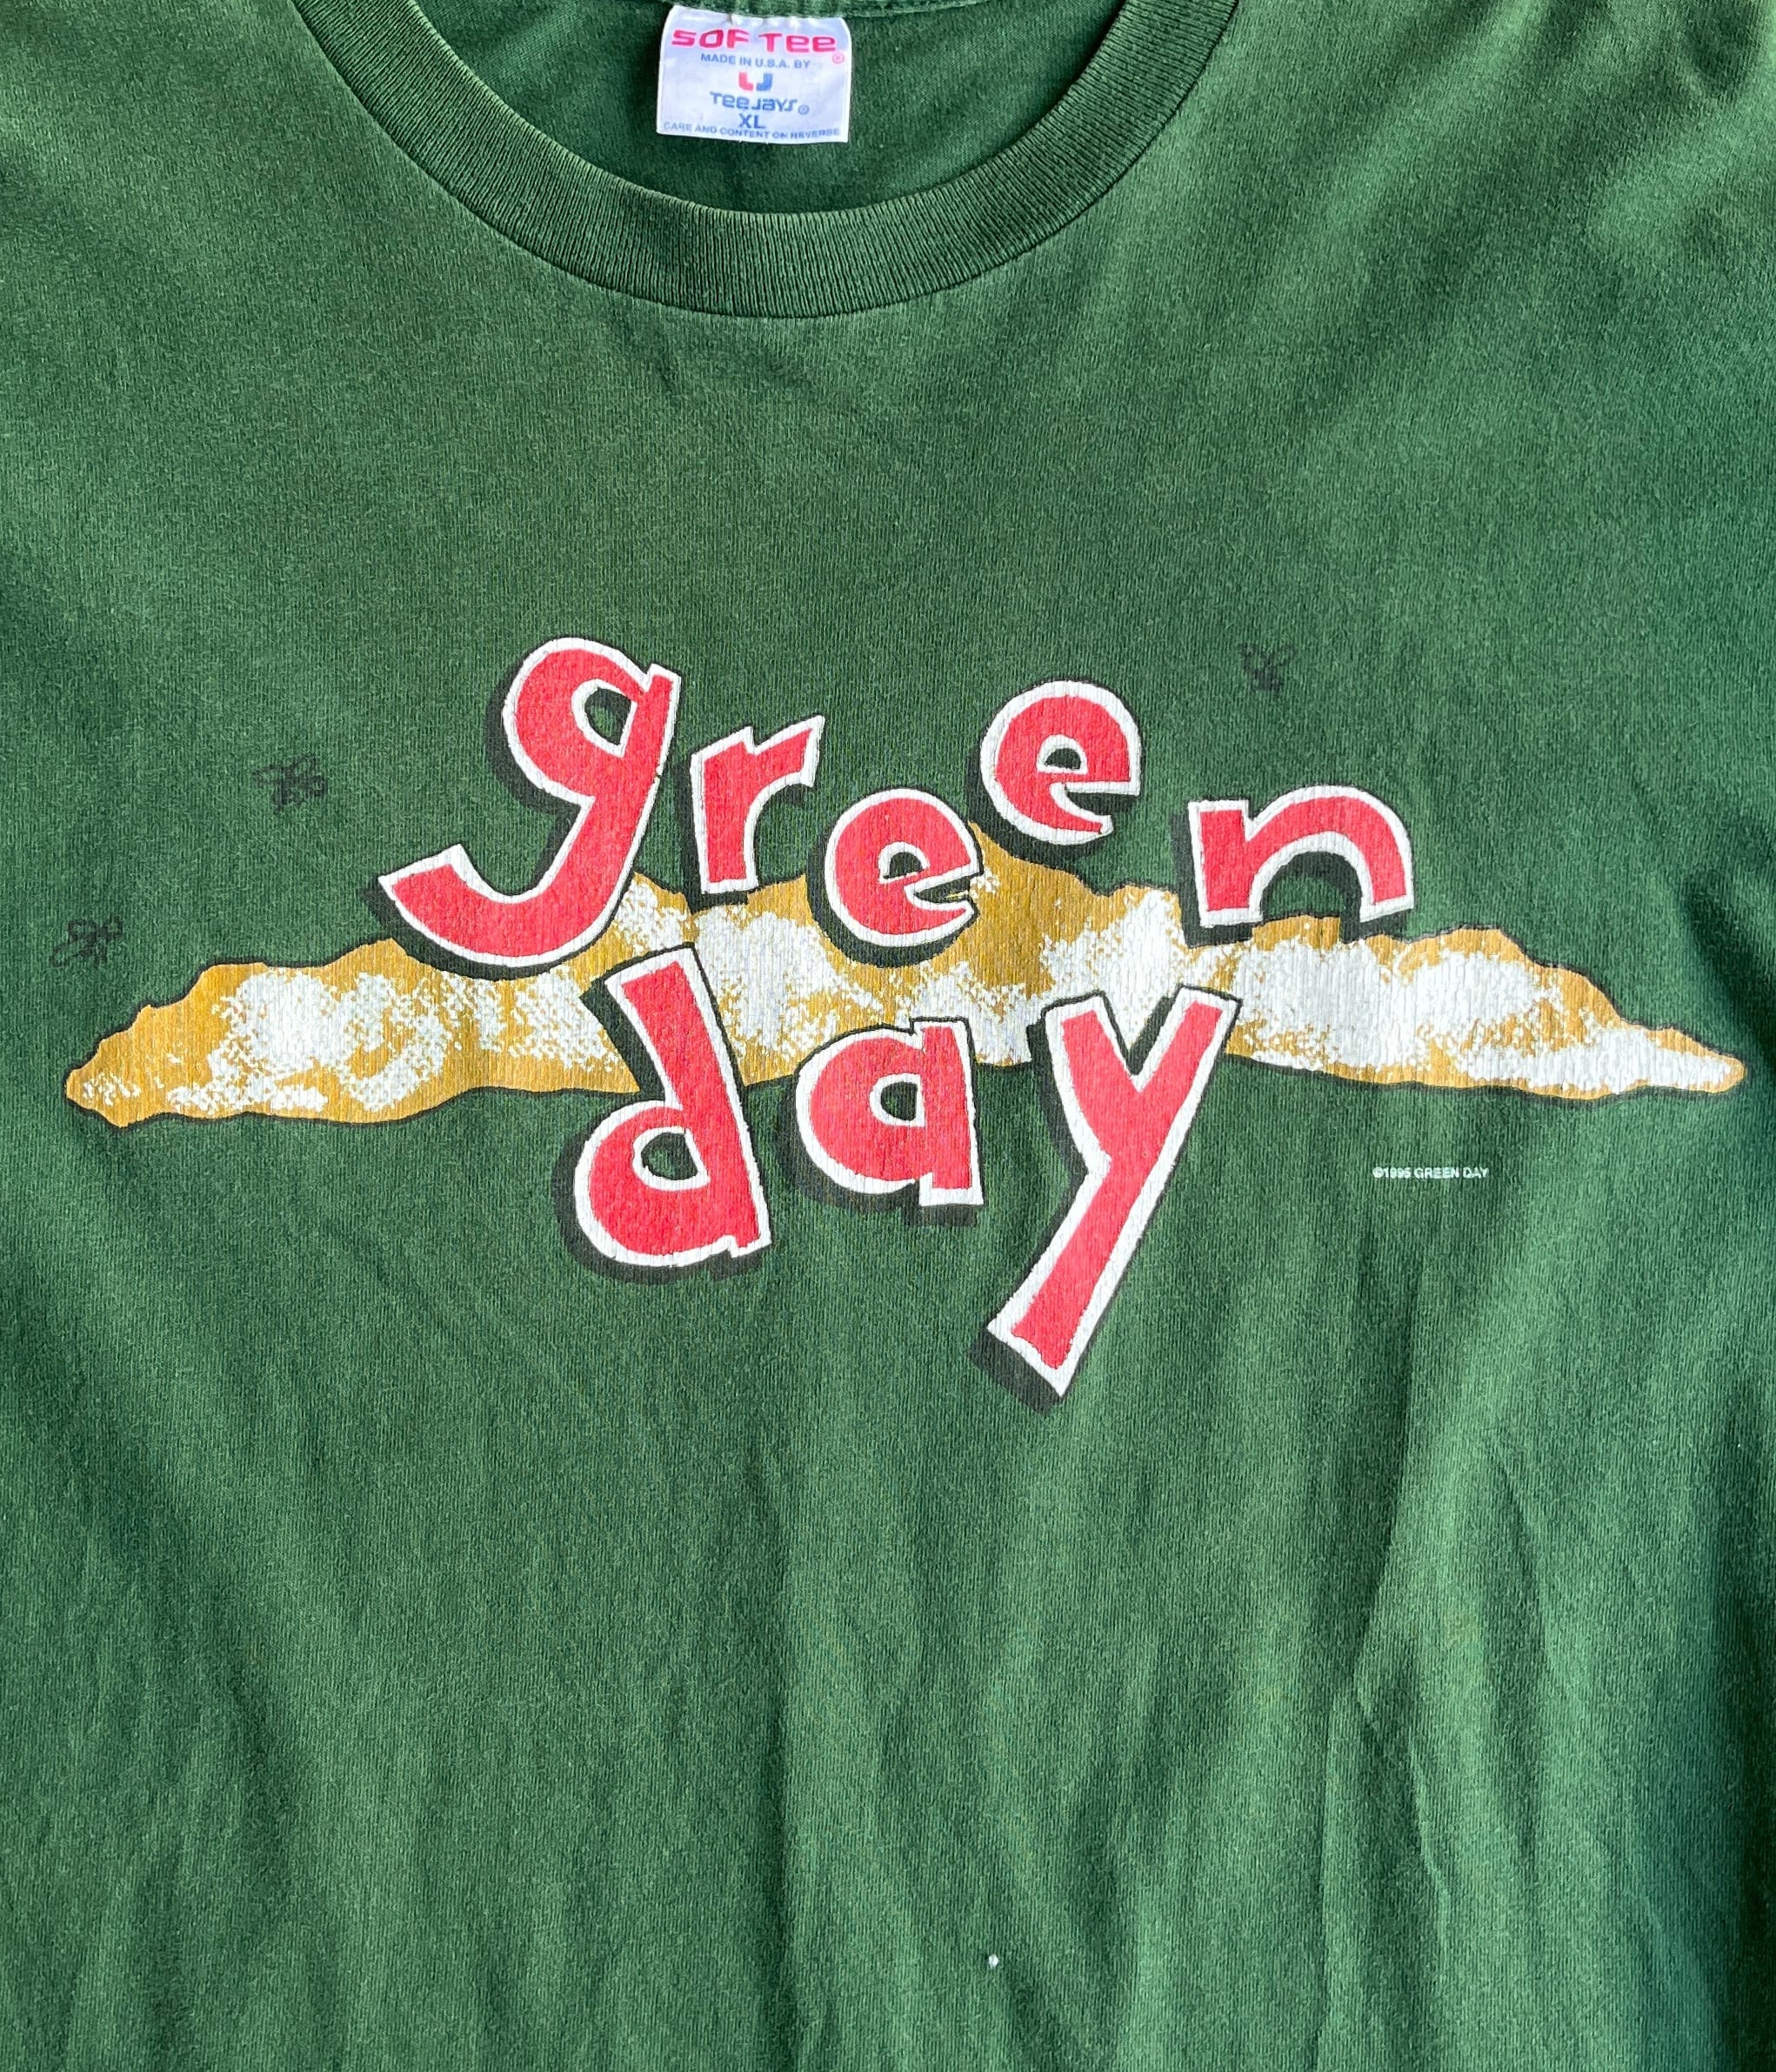 90s ヴィンテージ グリーン・デイ Green Day tee Tシャツ